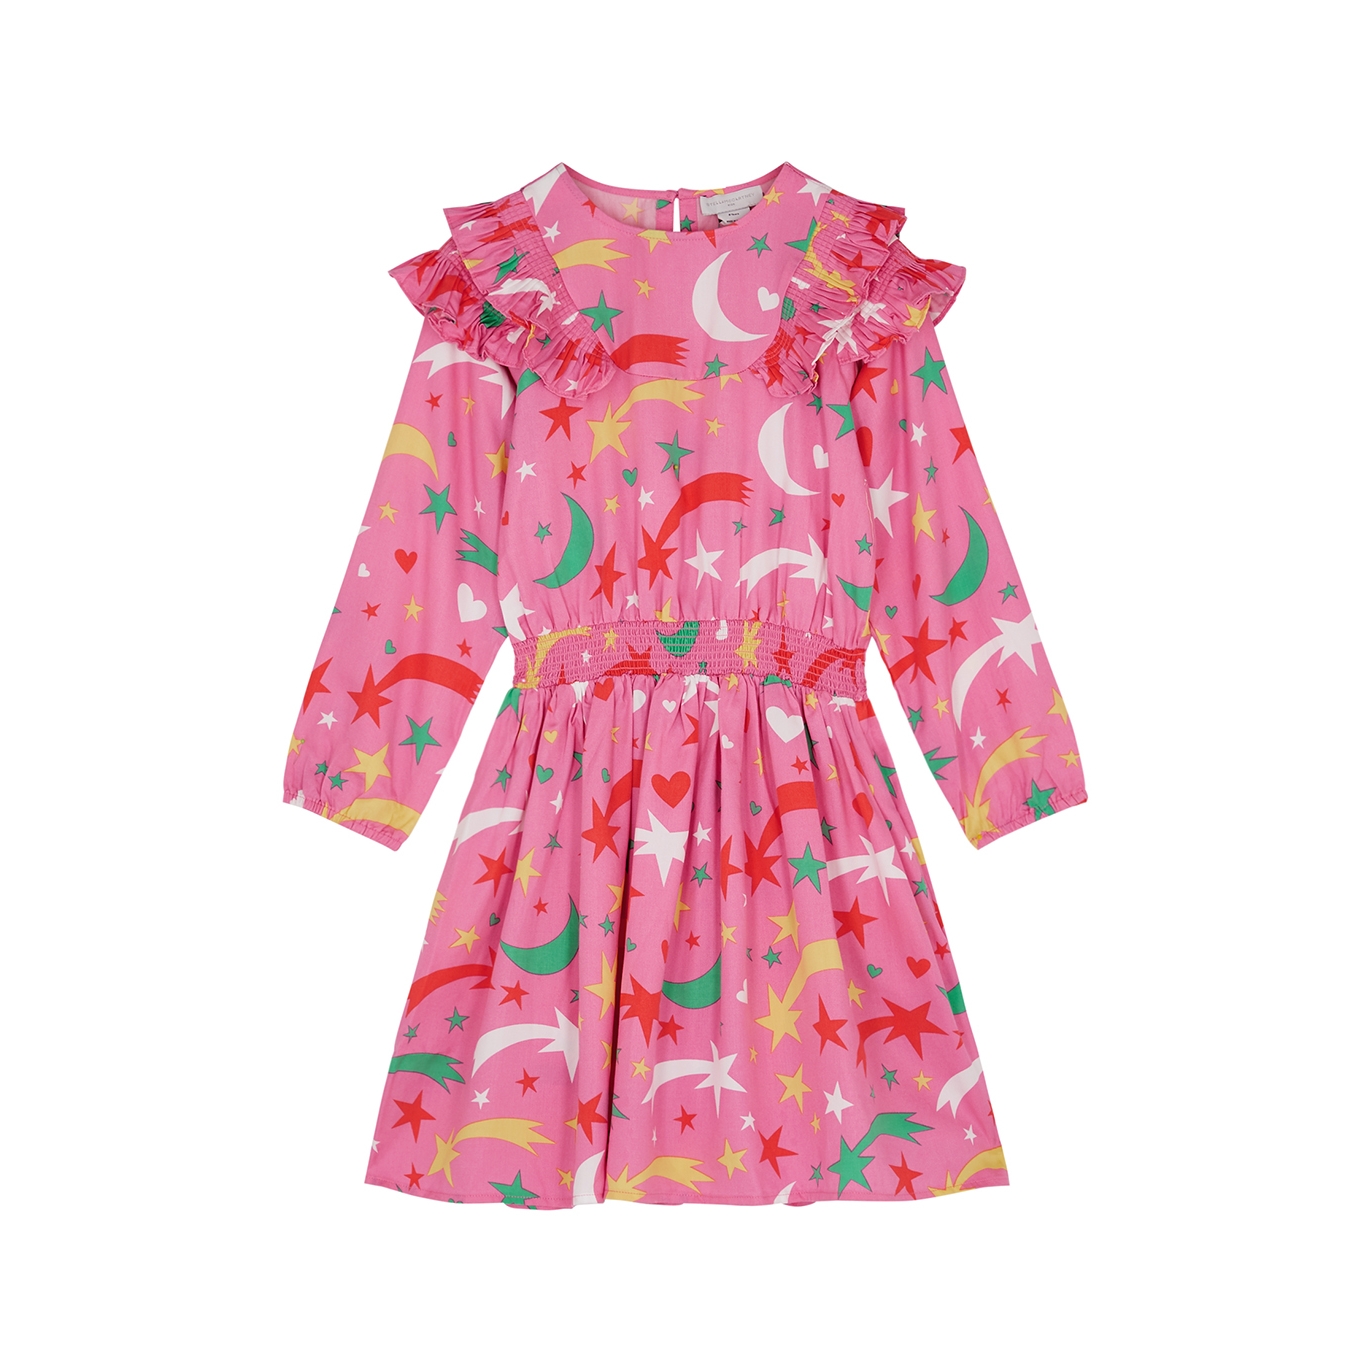 Stella McCartney Kids Shooting Star Printed Woven Dress - Pink & Other - 4 Years